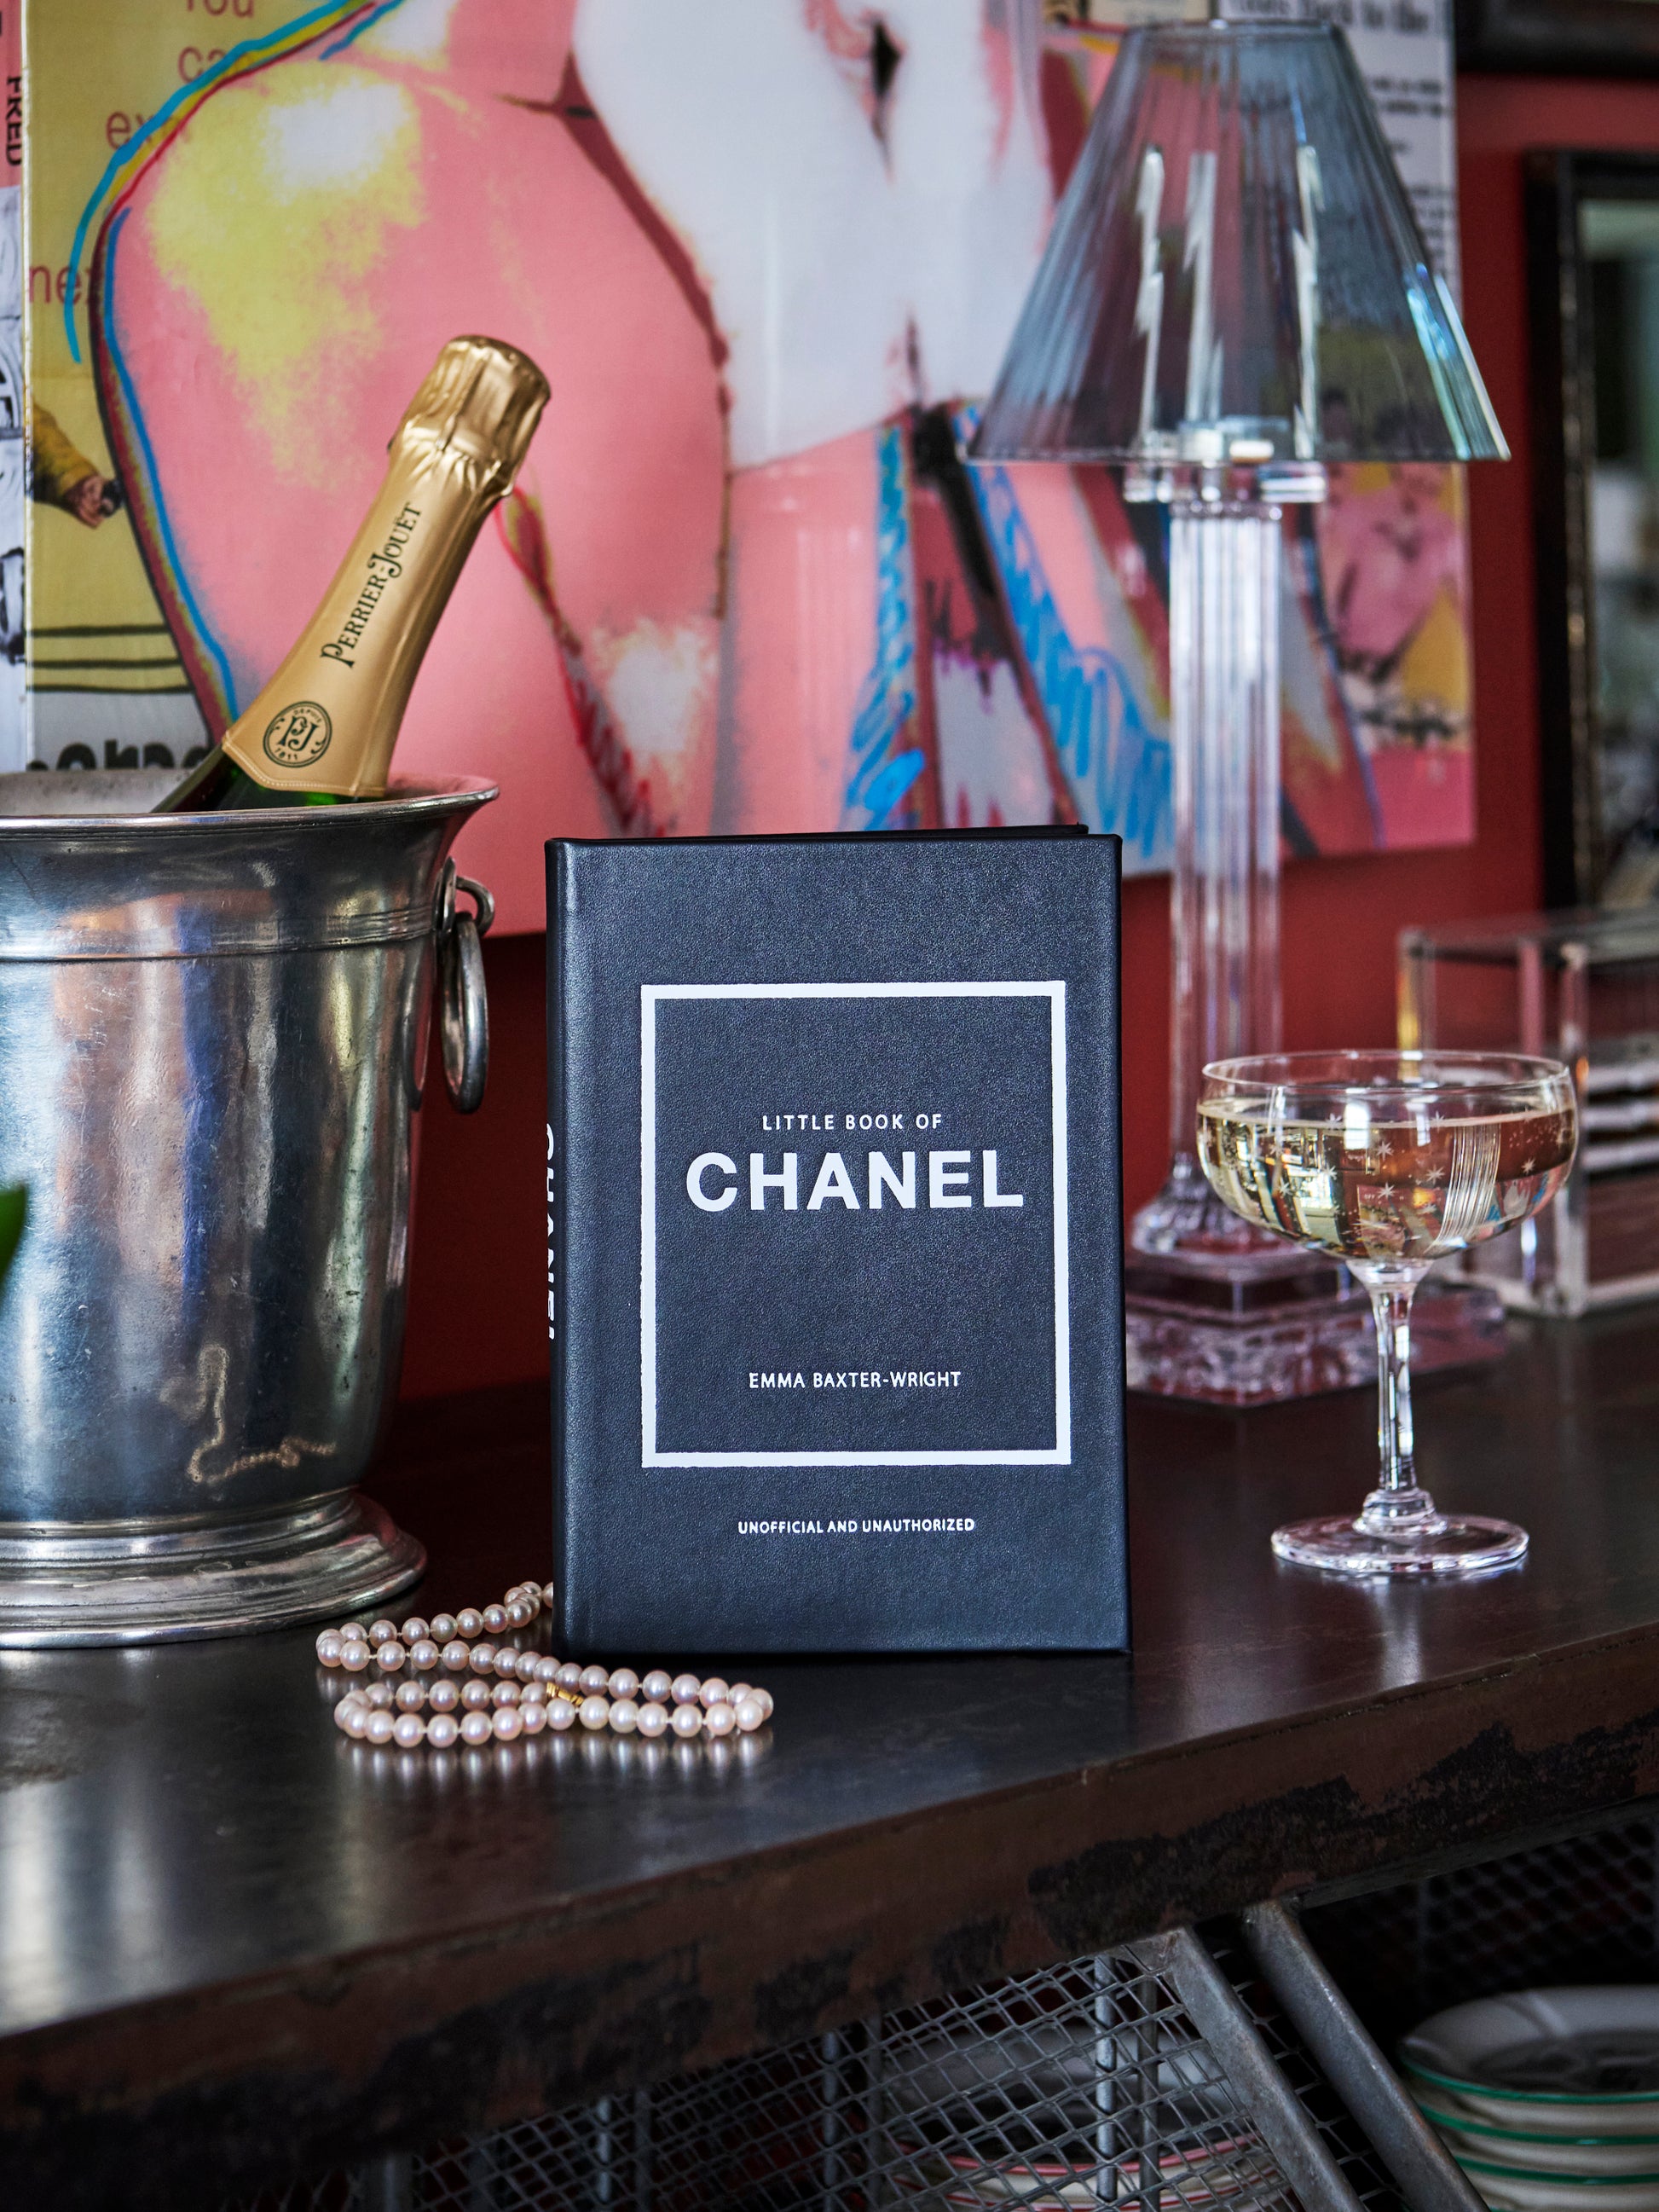 Little Book of Chanel Leather Bound Edition